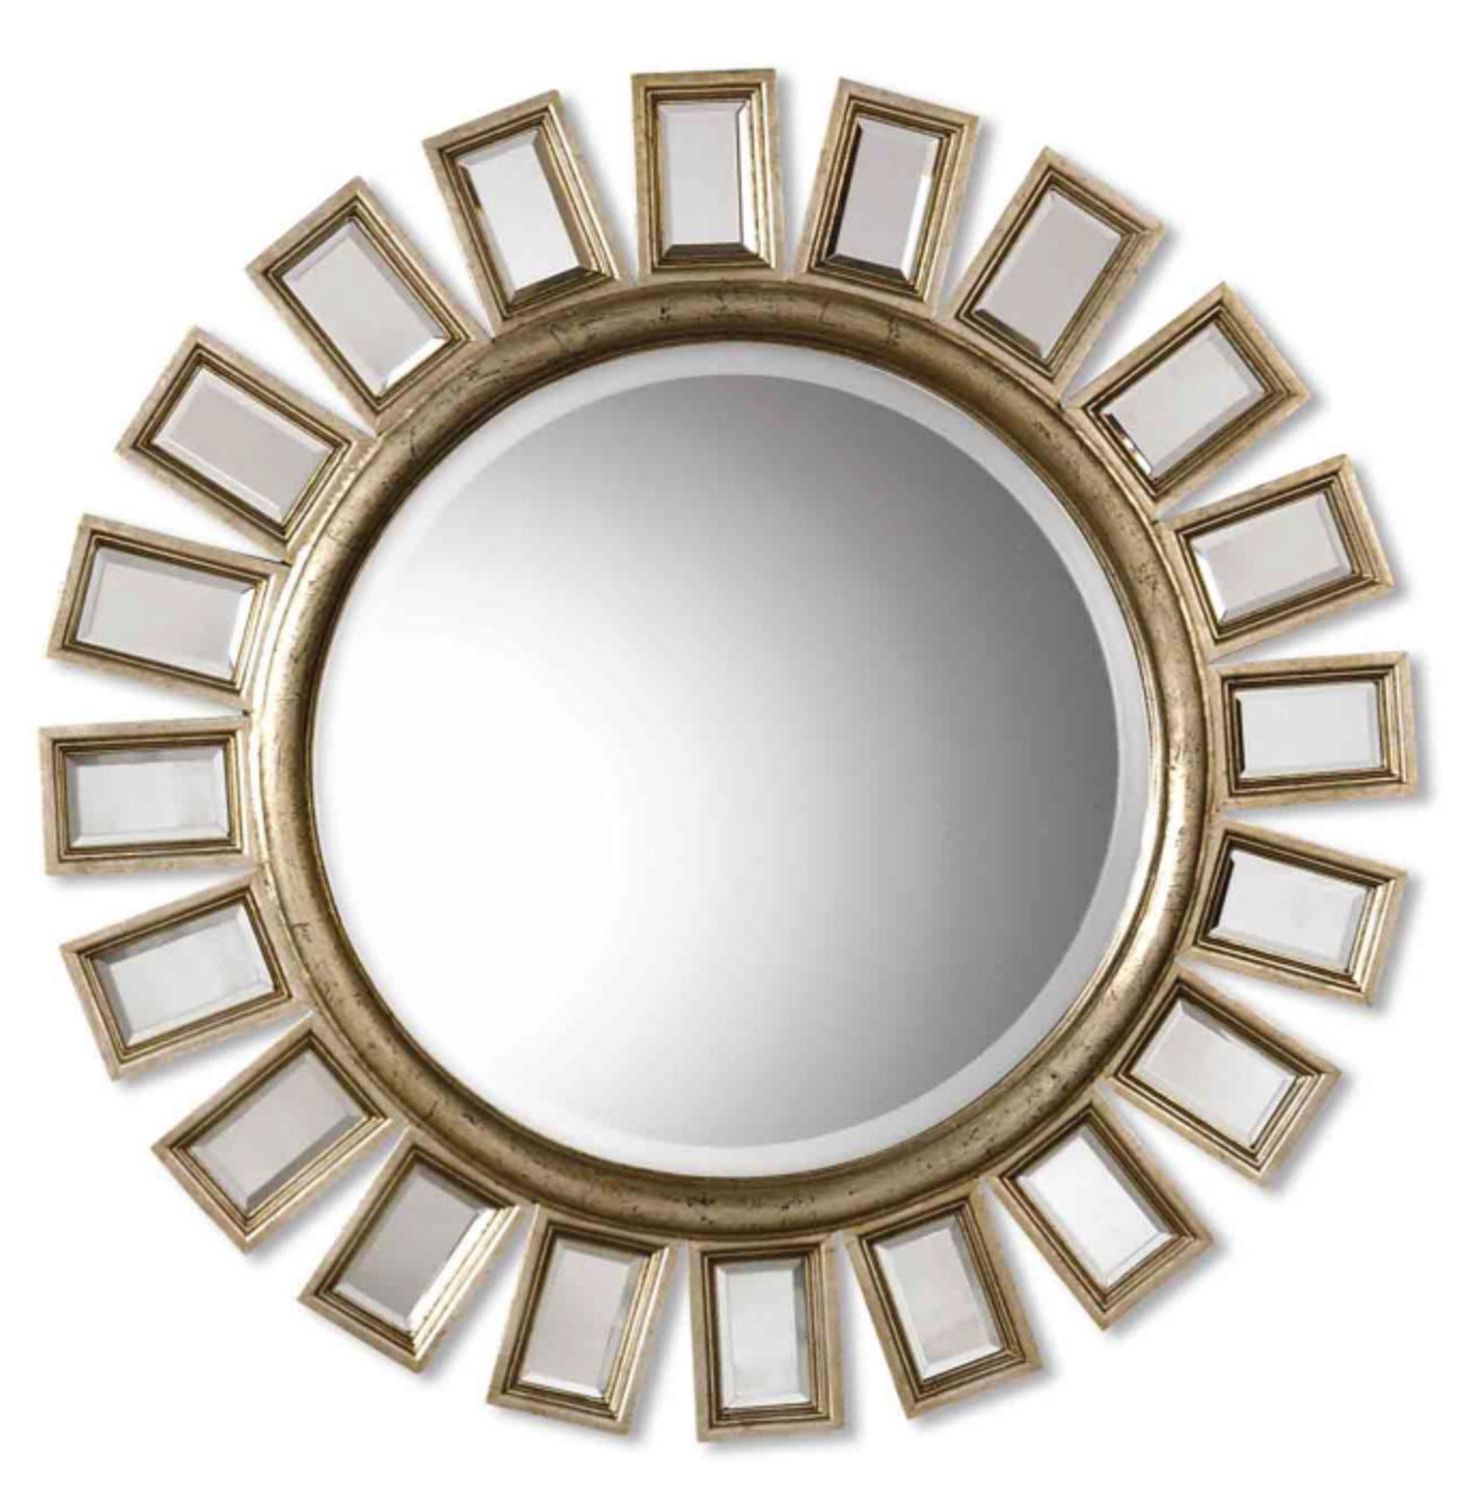 Scalloped Round Wall Mirrors Within Best And Newest 34" Distressed Silver Leaf Finish With Small Mirrors Framed Round Wall (View 14 of 15)